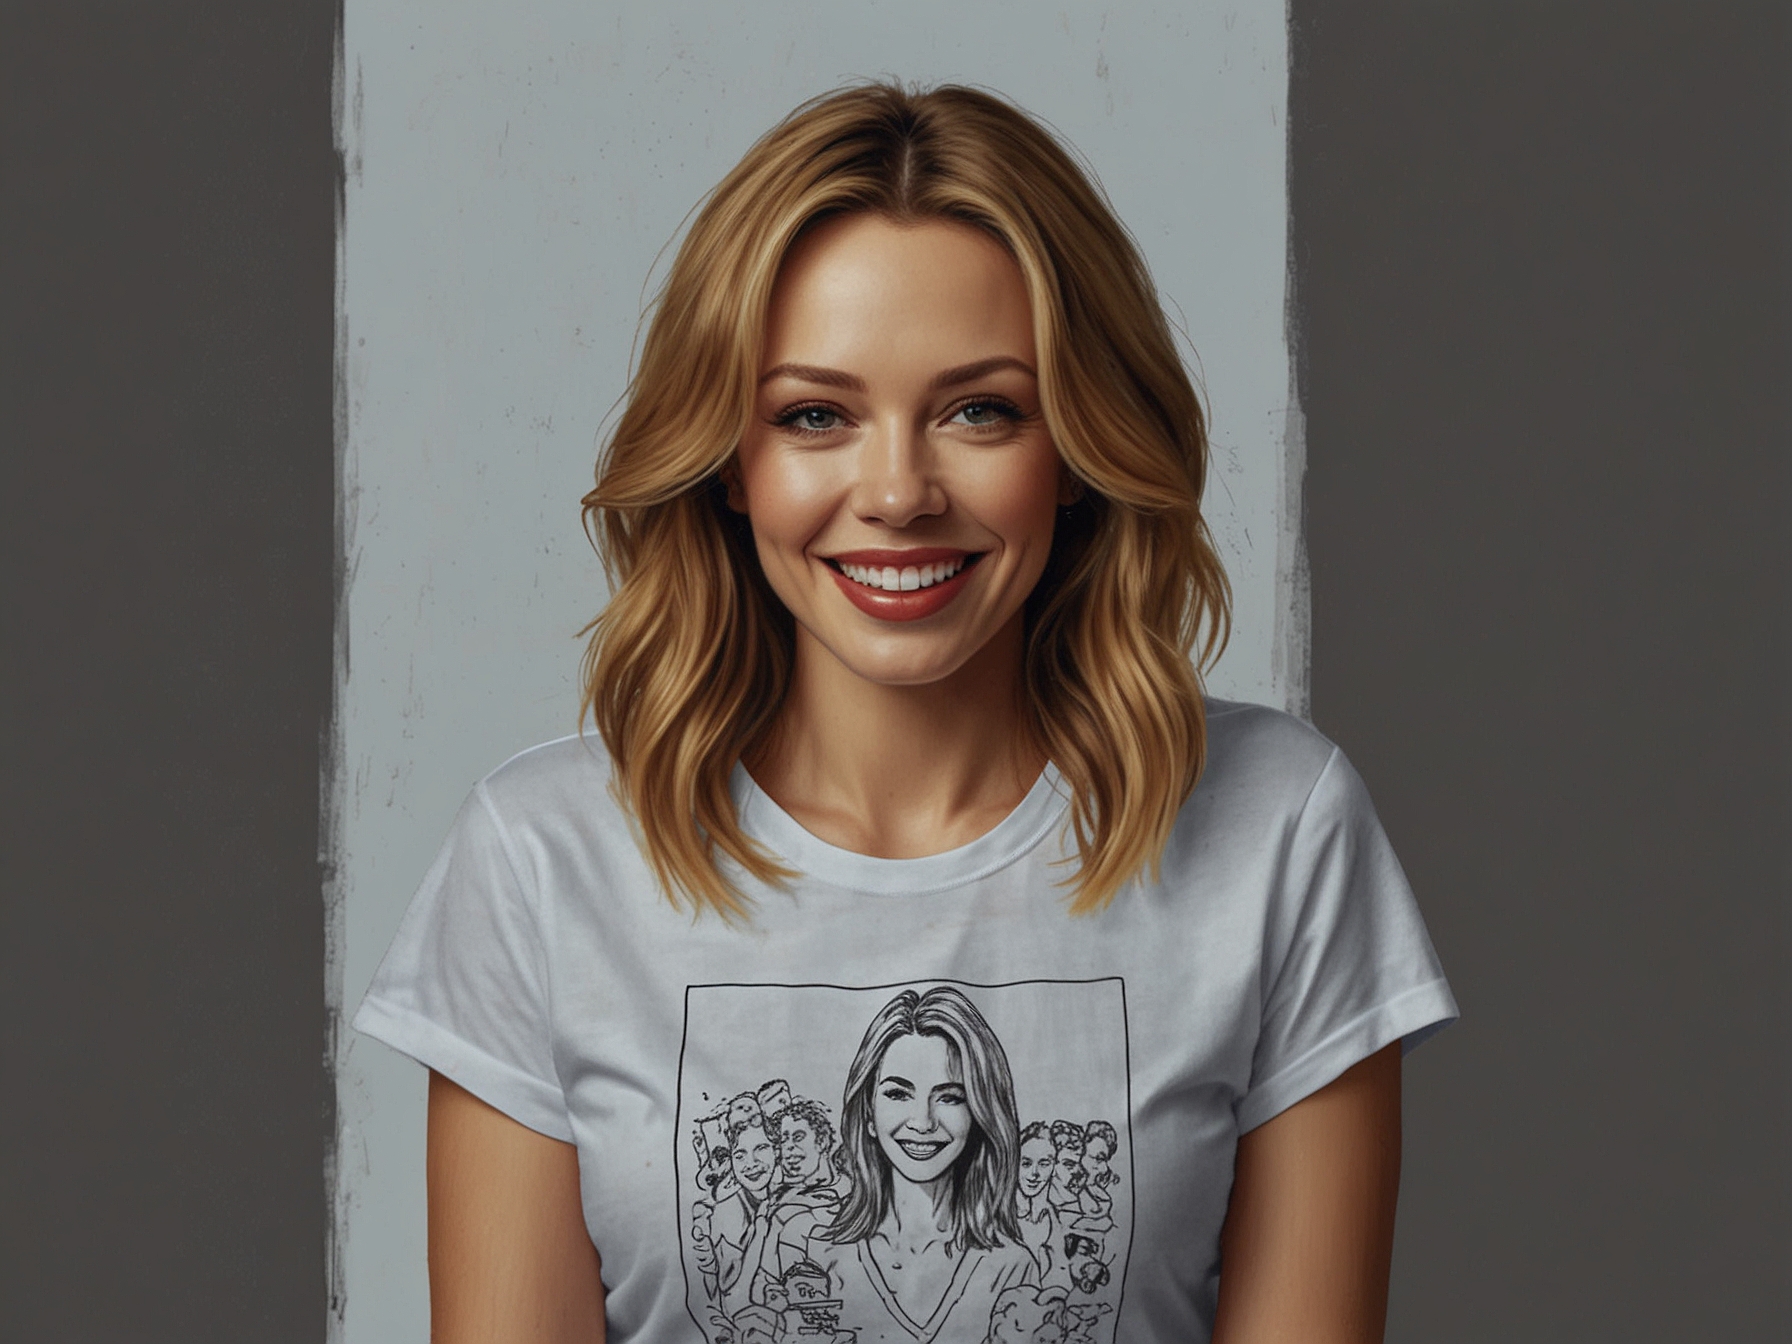 Kylie Minogue poses cheerfully in an Instagram photo, wearing a T-shirt with a quote from Jonathan Bailey's character in 'Fellow Travelers', highlighting their unlikely yet delightful friendship.